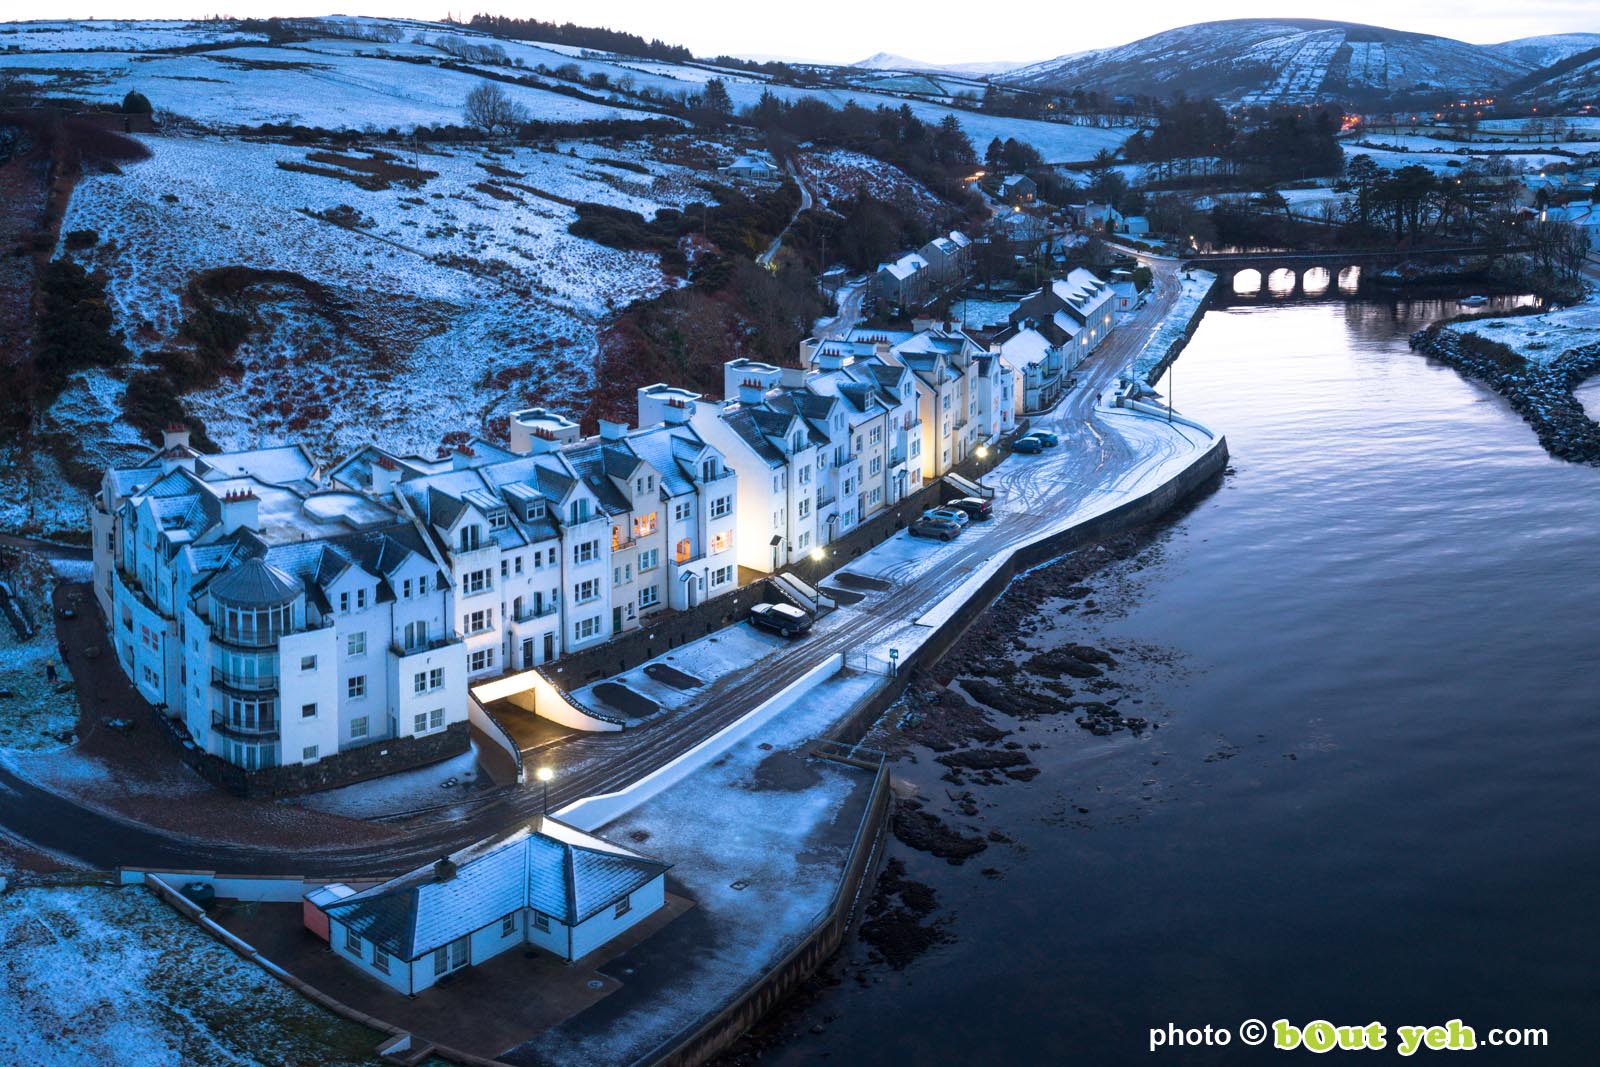 Aerial photograph of Bay Apartments Cushendun, Northern Ireland, in winter under snow at dusk by Bout Yeh photographers Belfast. Photo 231121